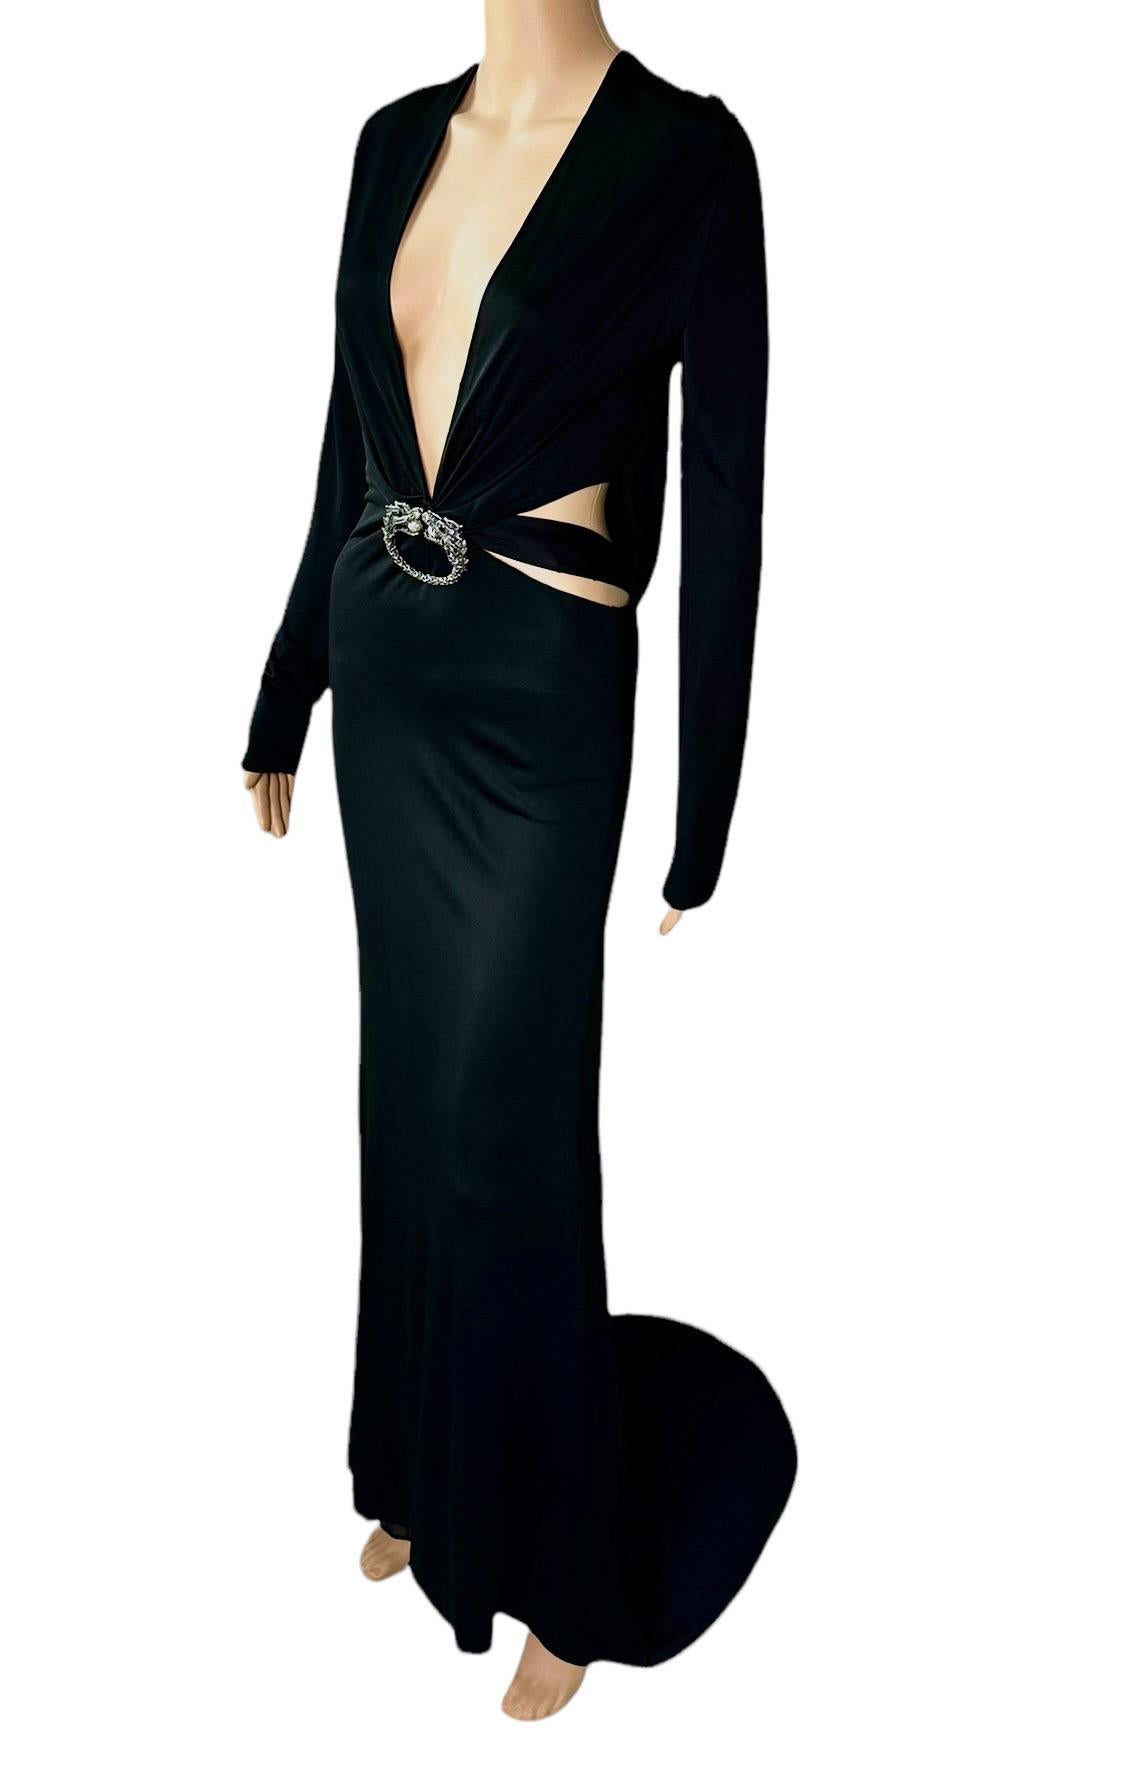 Tom Ford for Gucci F/W 2004 Embellished Plunging Cutout Black Evening Dress Gown For Sale 5